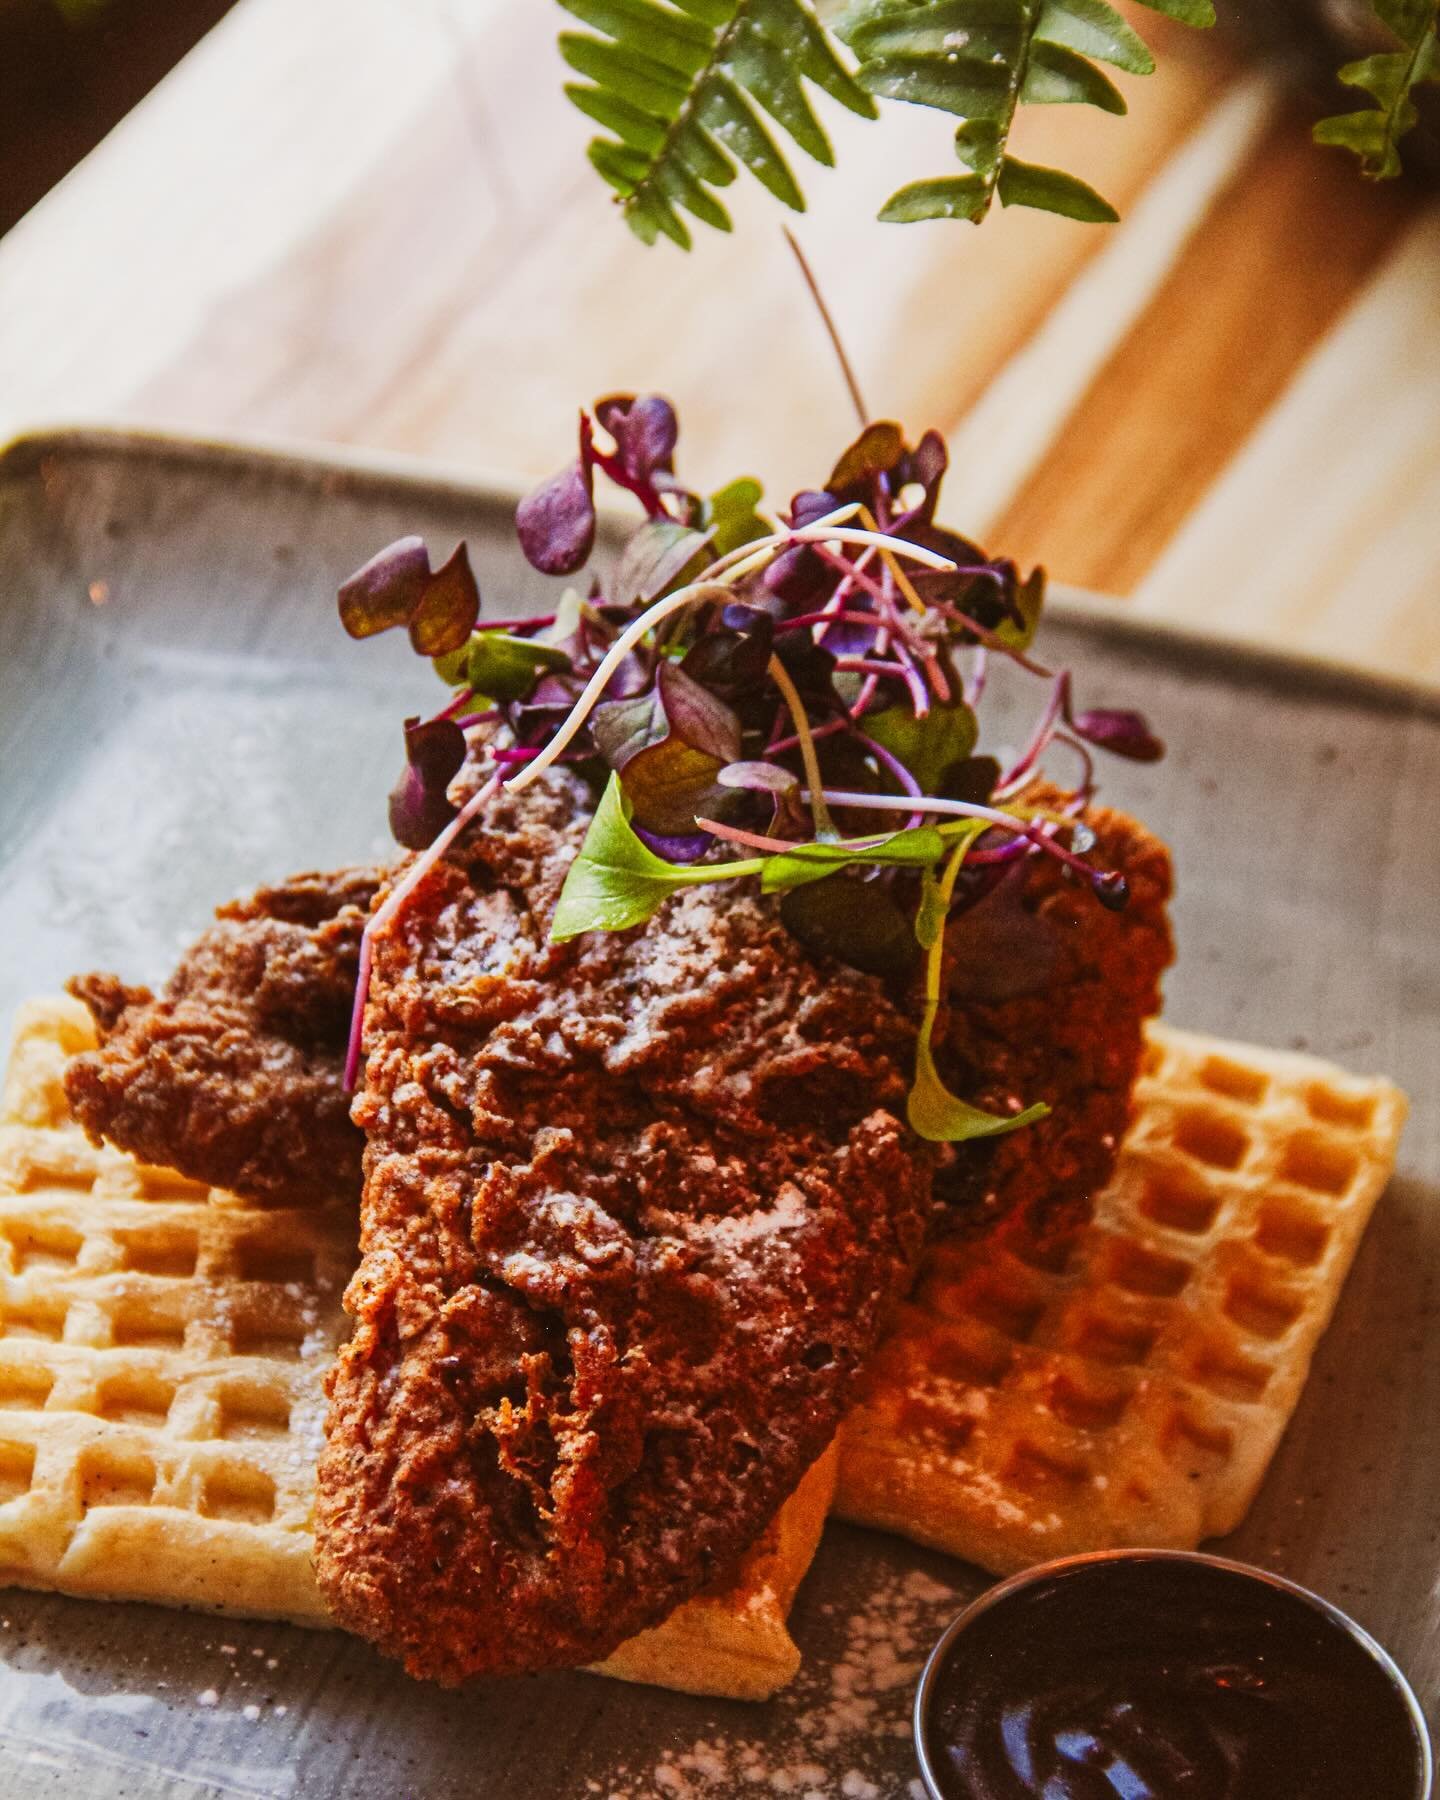 Chickin &amp; Waffles 🧇 🍗🍁

Only available during brunch Sat &amp; Sun 11am-2pm

Photo: @baileysimonephotography